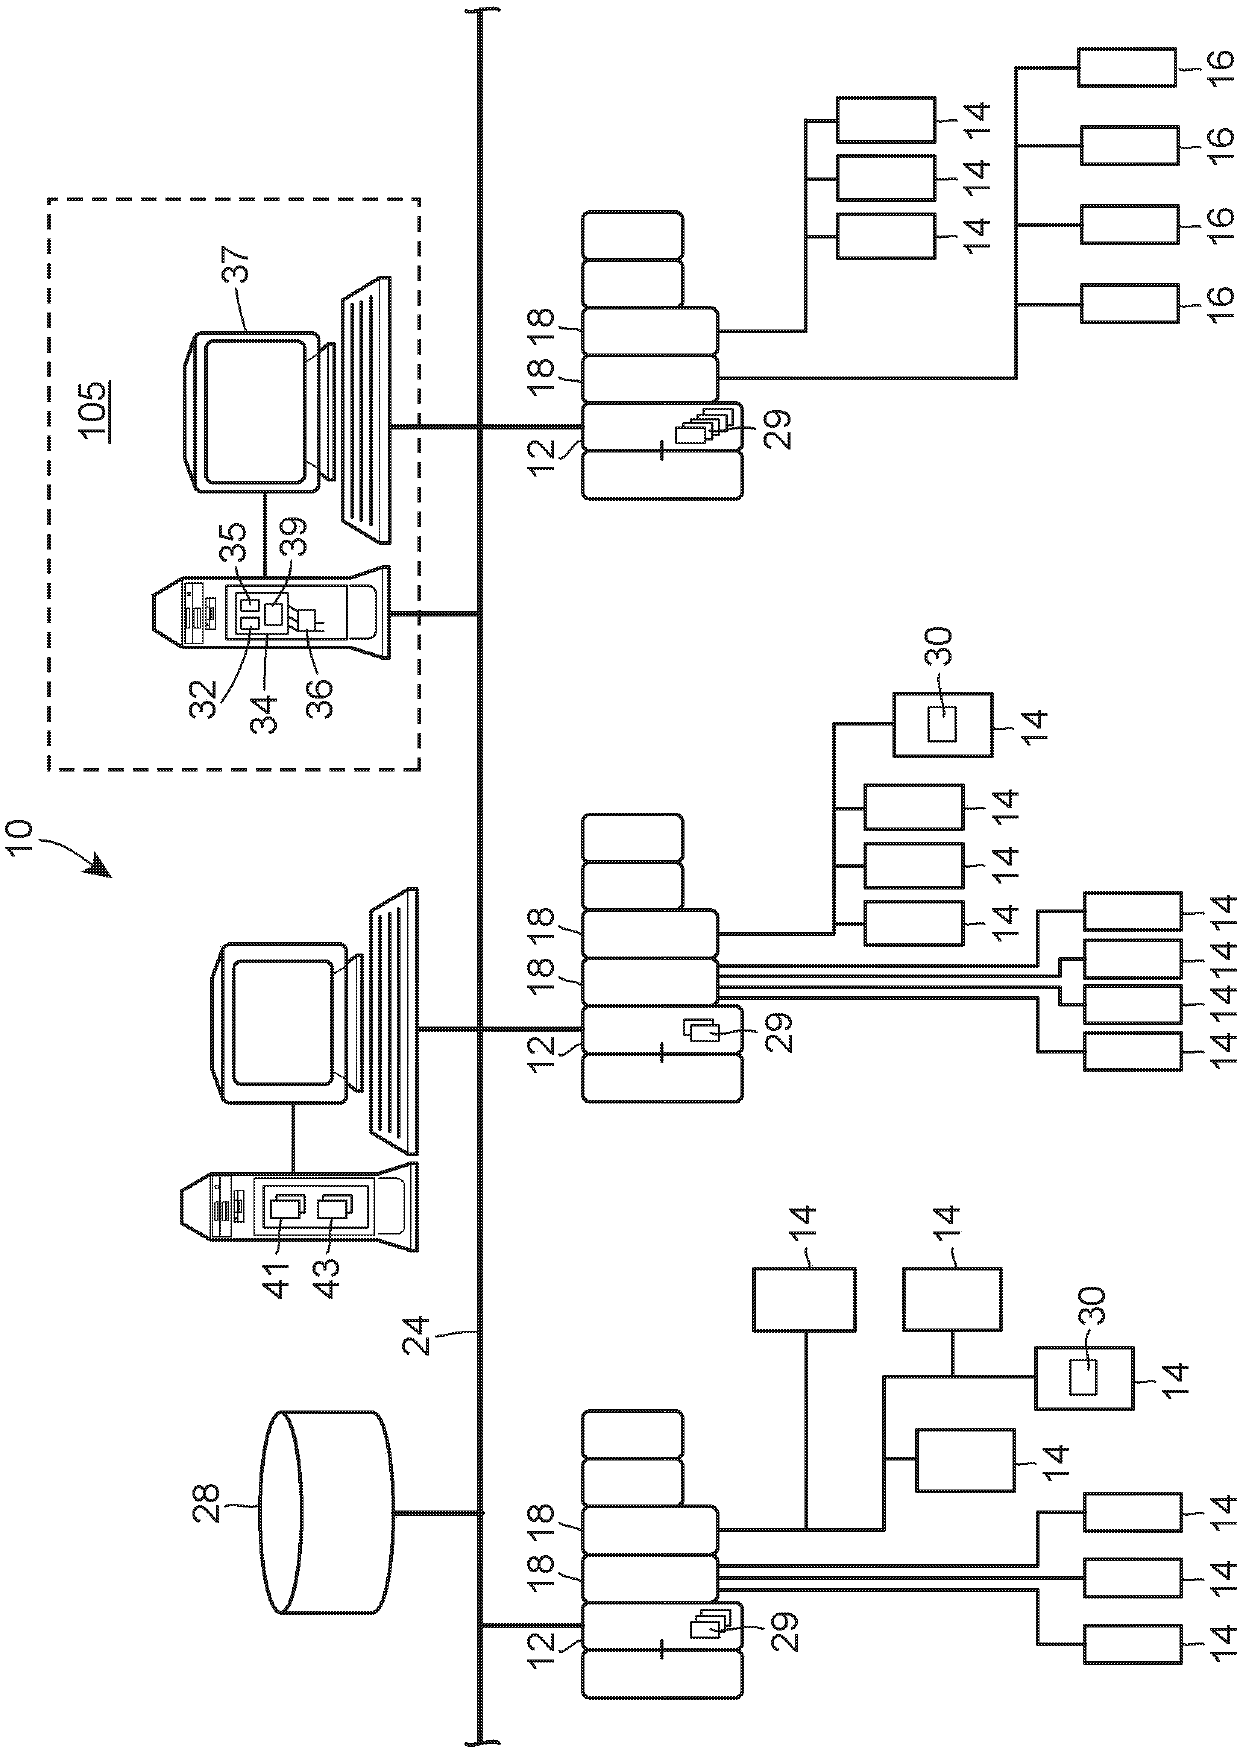 Plant builder system with integrated simulation and control system configuration